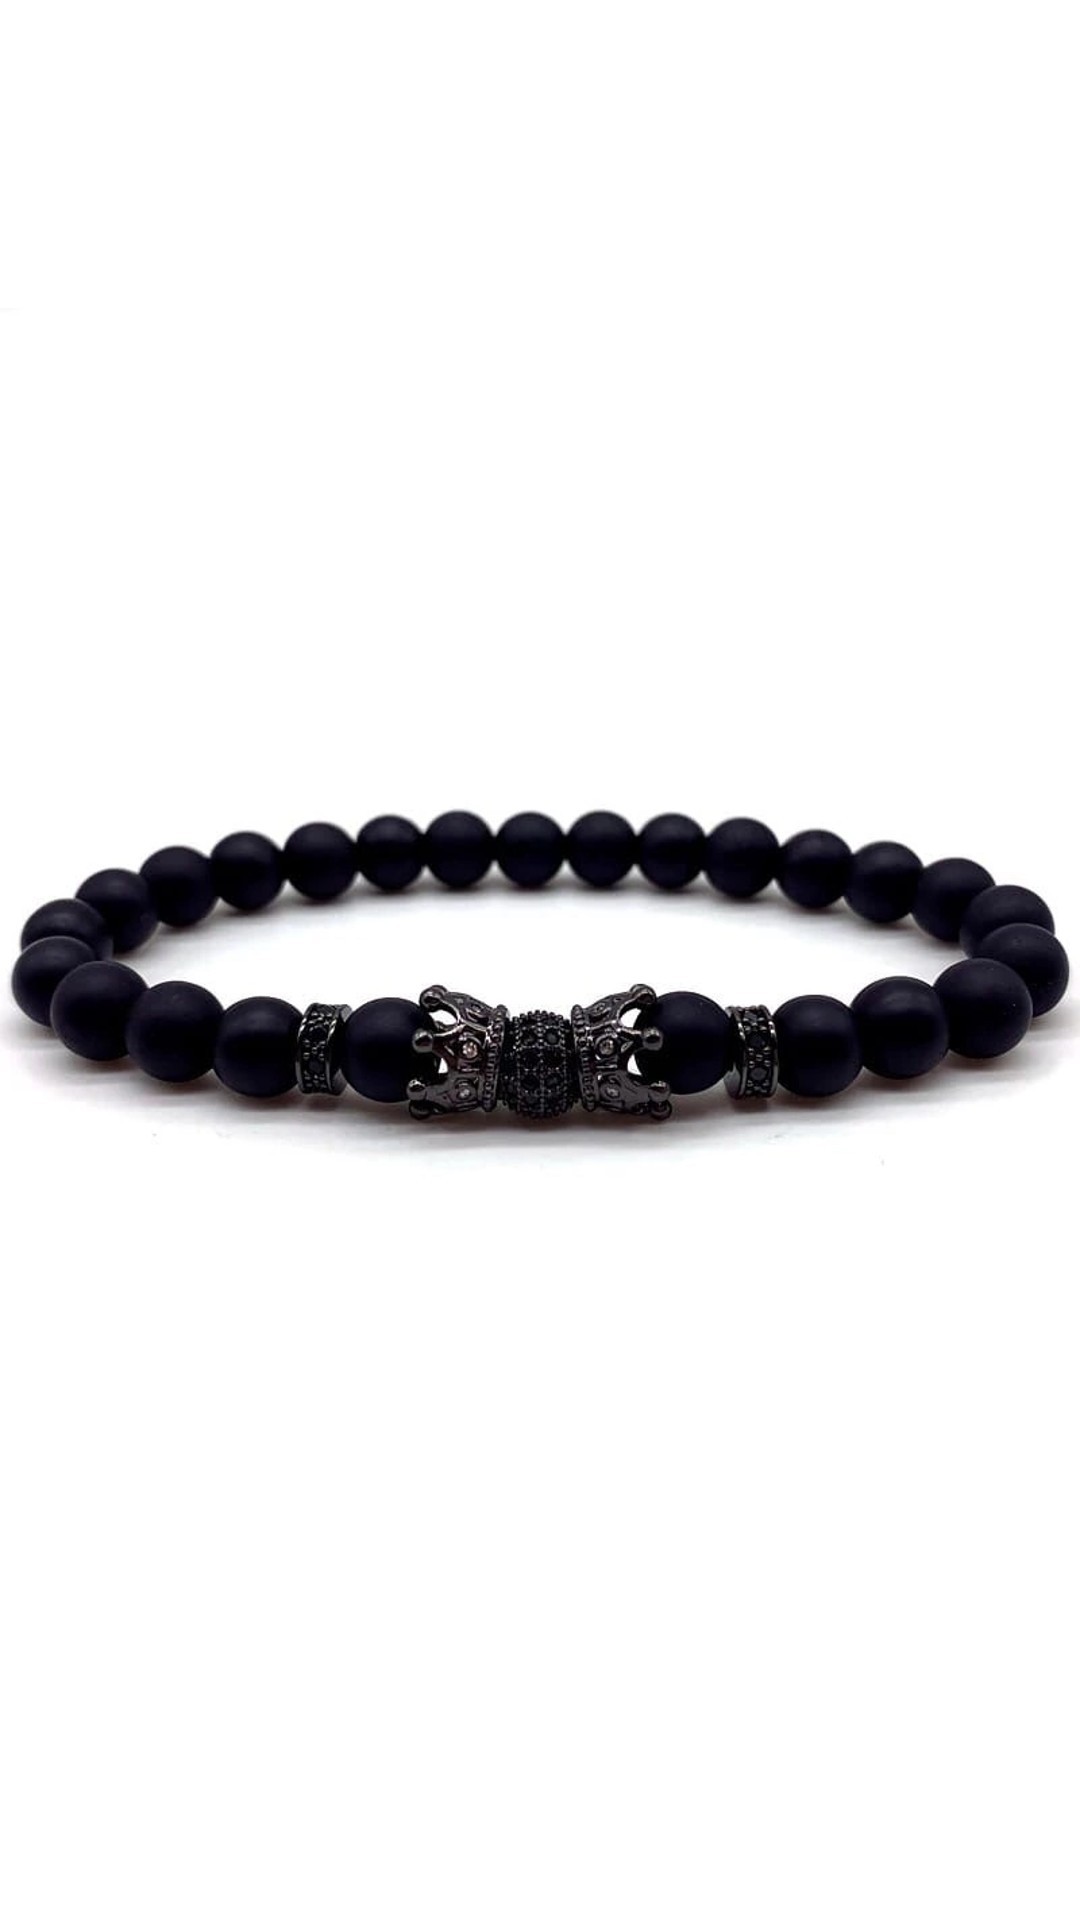 Elite shungite bracelet with black ball and crowns (90082)